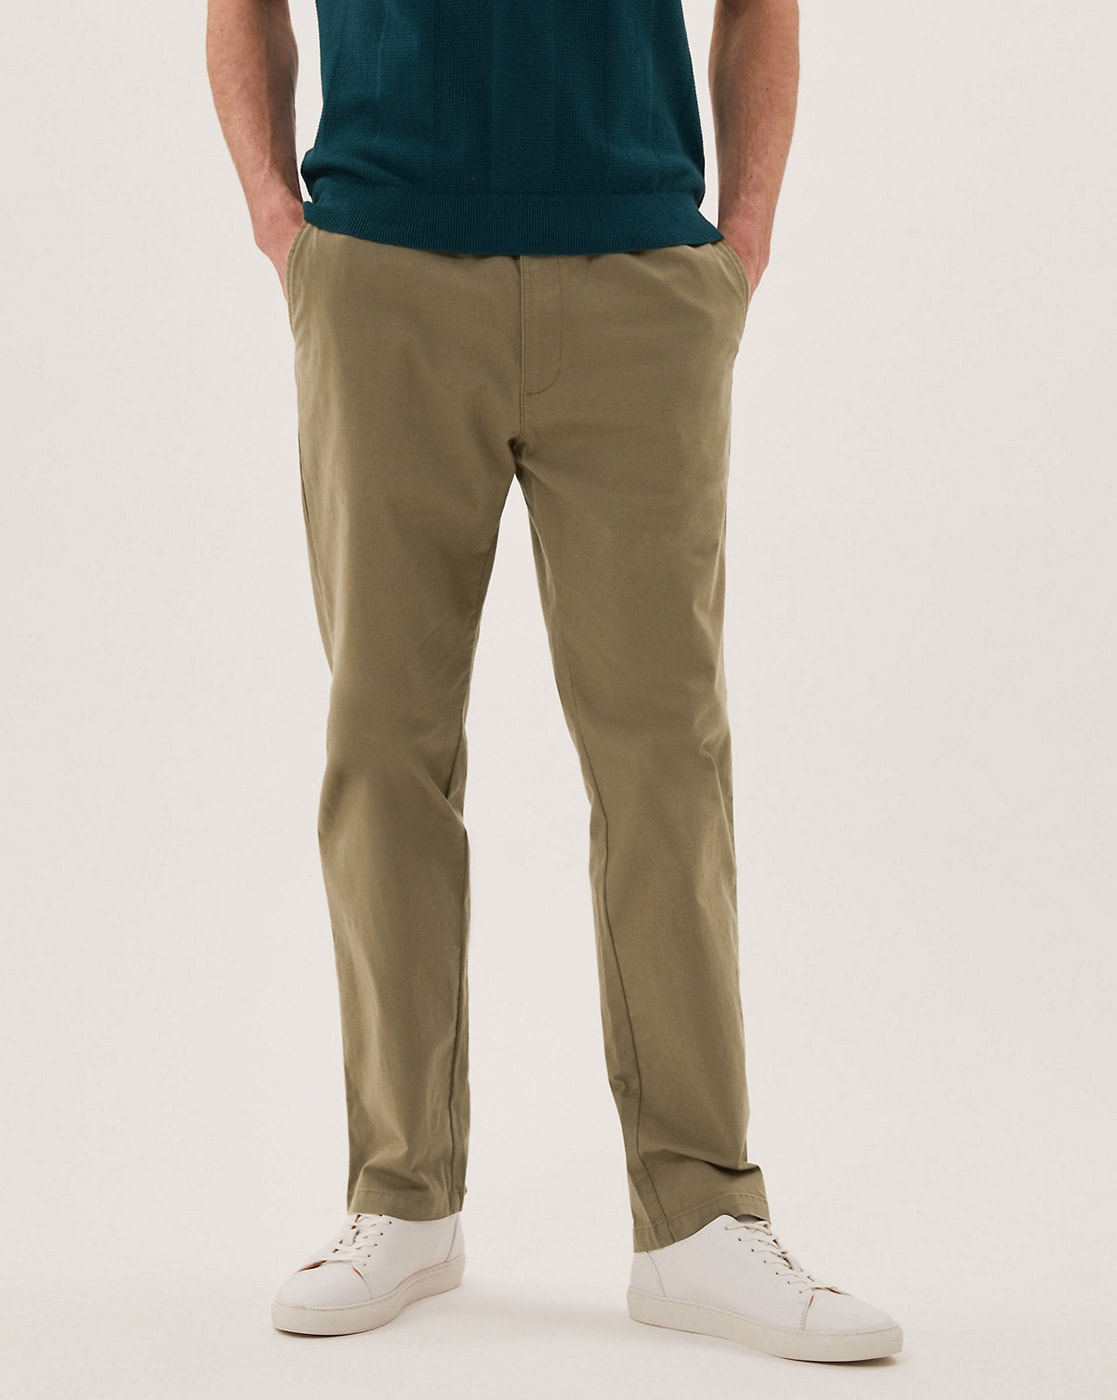 Casual Bottoms for Men  Buy Chinos Trousers for Men Online at MS India